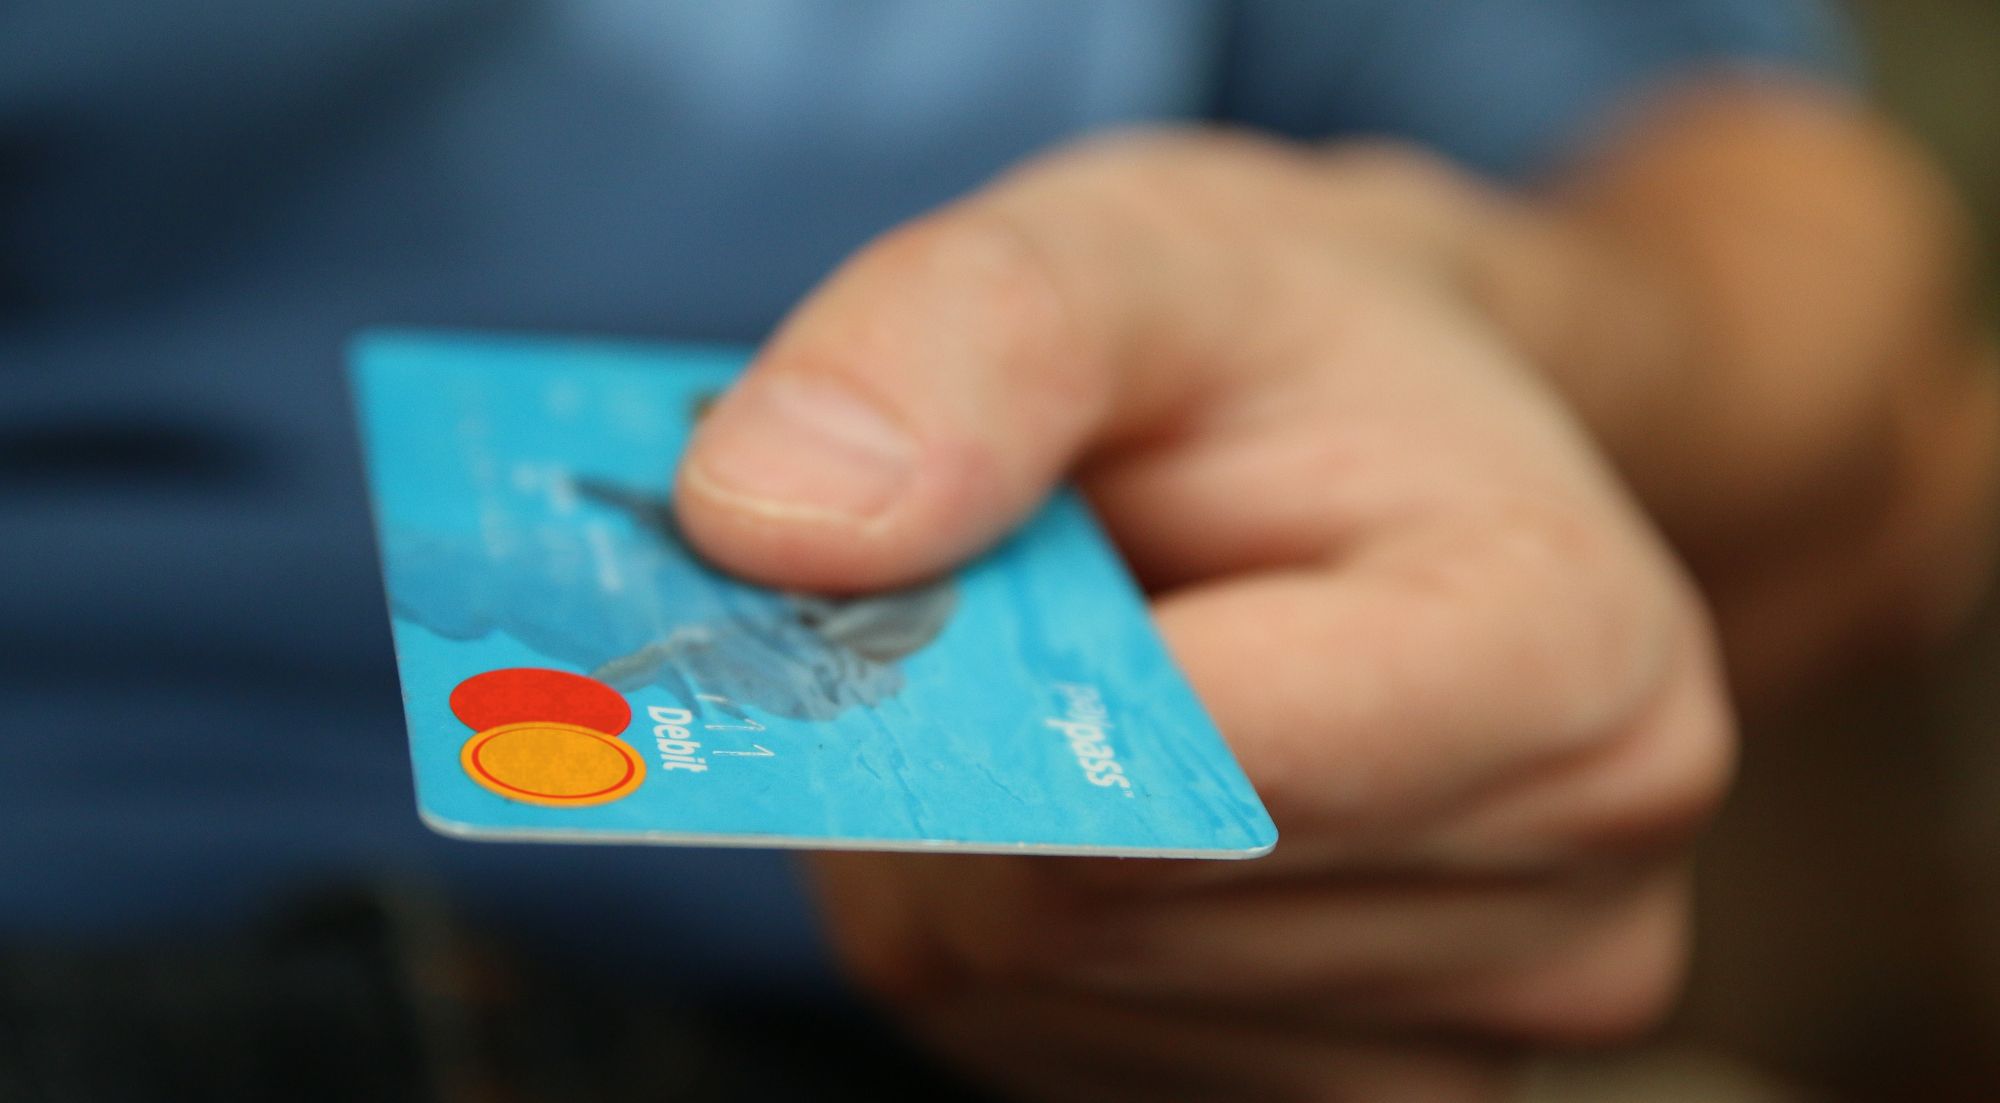 person holding blue payment card